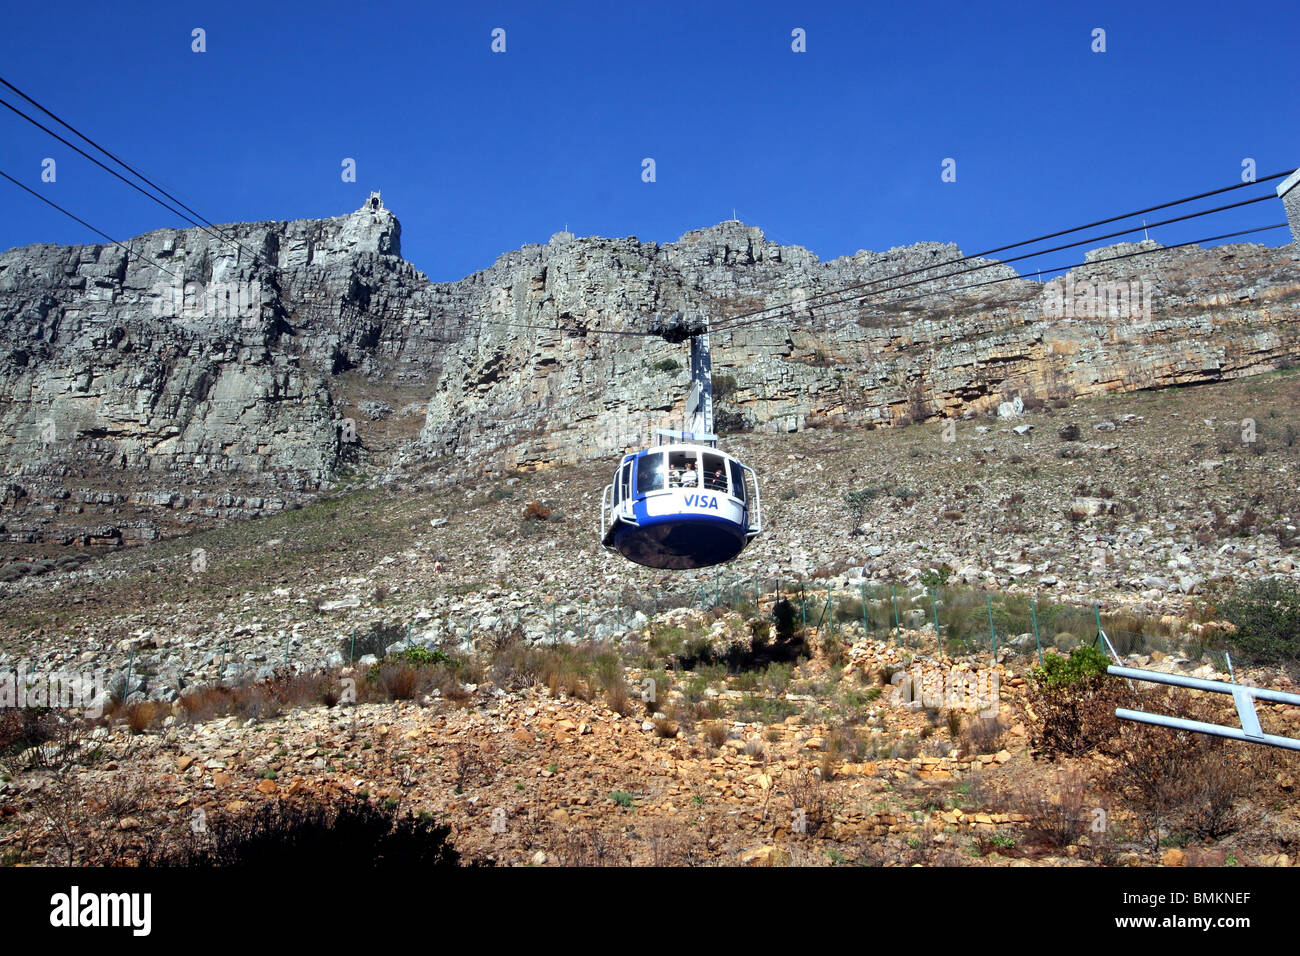 Table Mountain, Cape Town, South Africa. Stock Photo